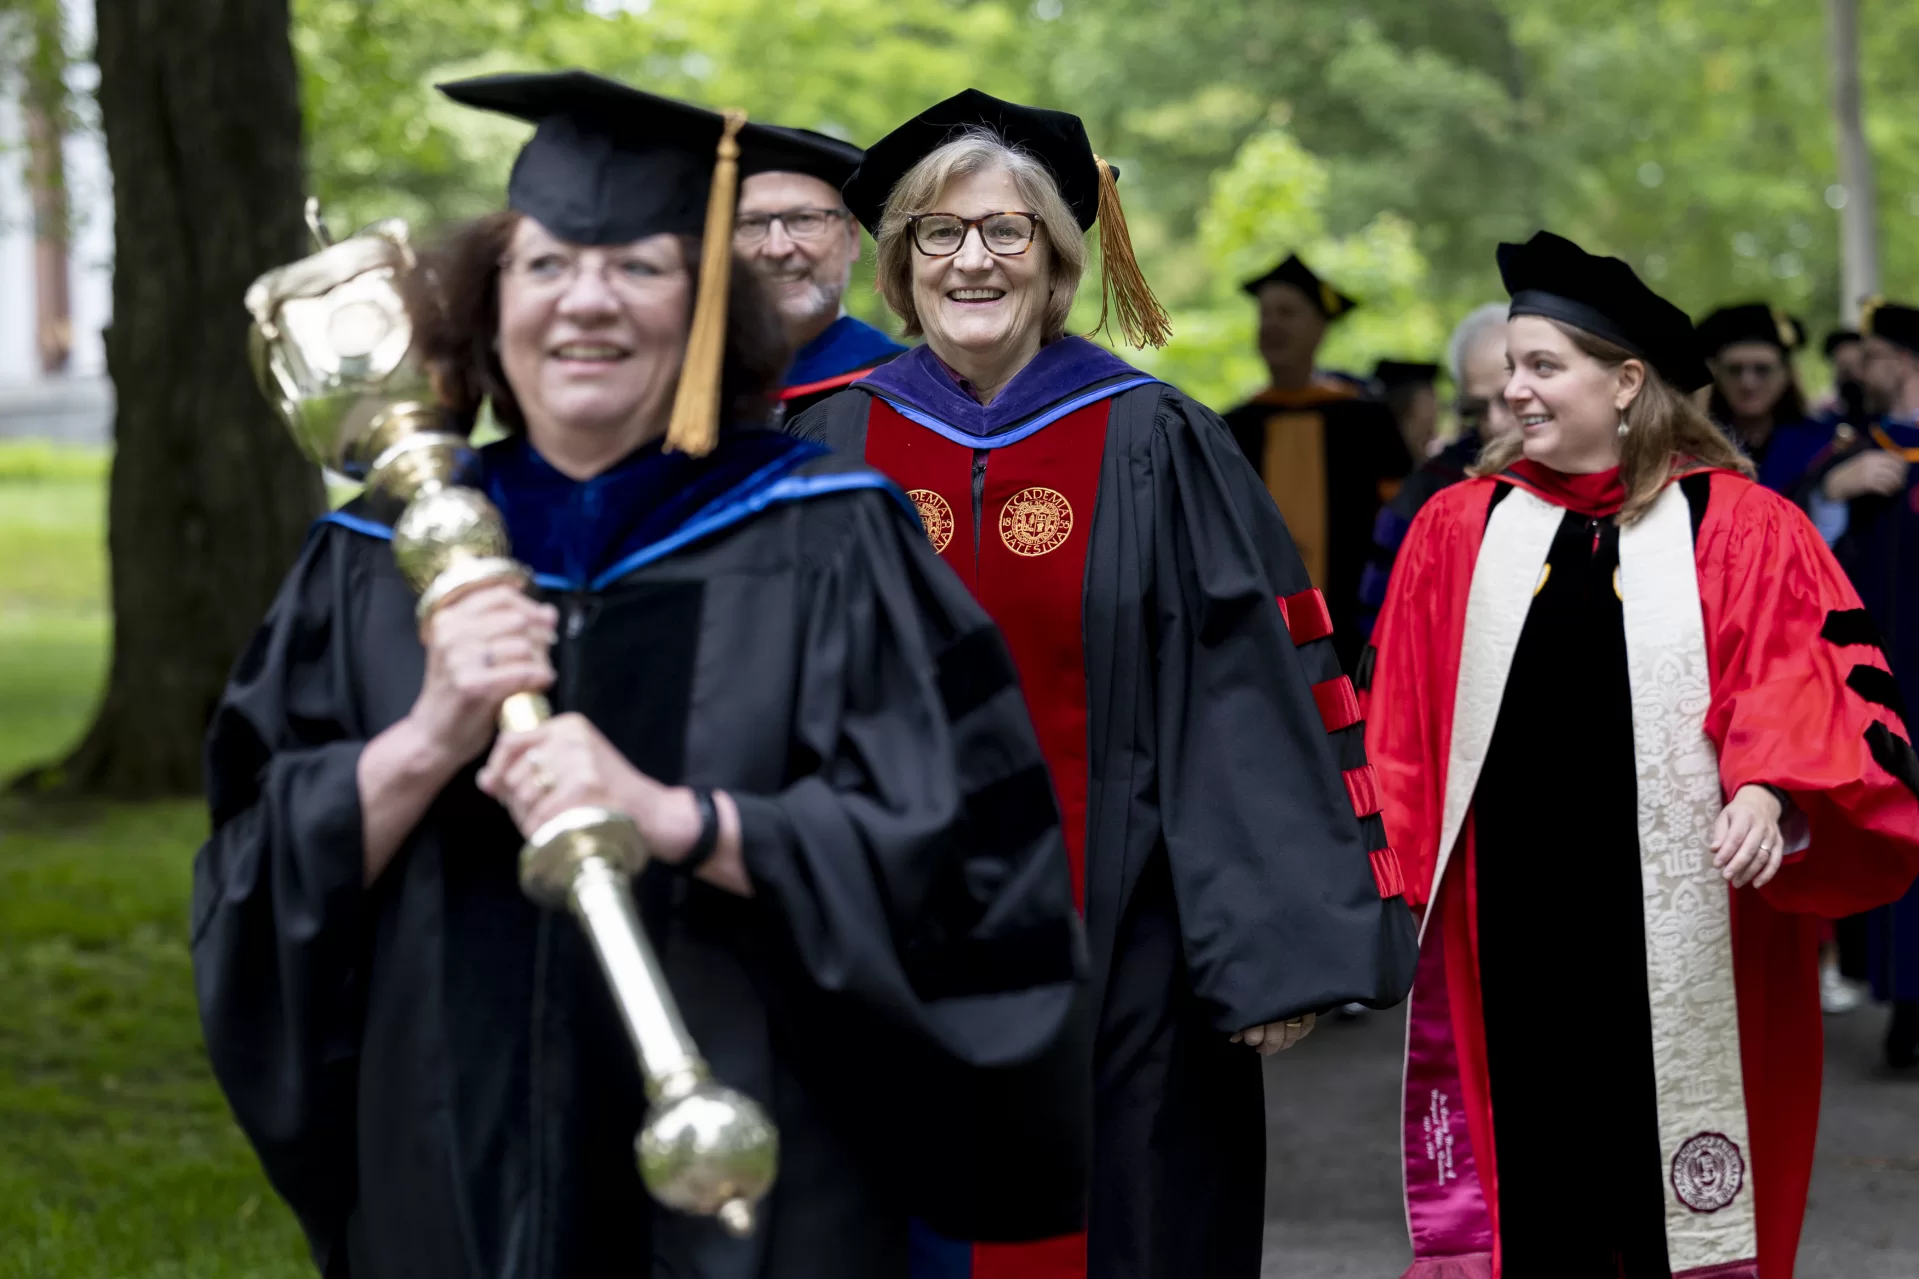 President Spencer follows the college’s mace bearer, Professor of French and Francophone Studies Mary Rice-DeFosse, during the academic procession for the Class of 2020’s long-awaited in-person graduation celebration on June 4, 2022. (Phyllis Graber Jensen/Bates College) 